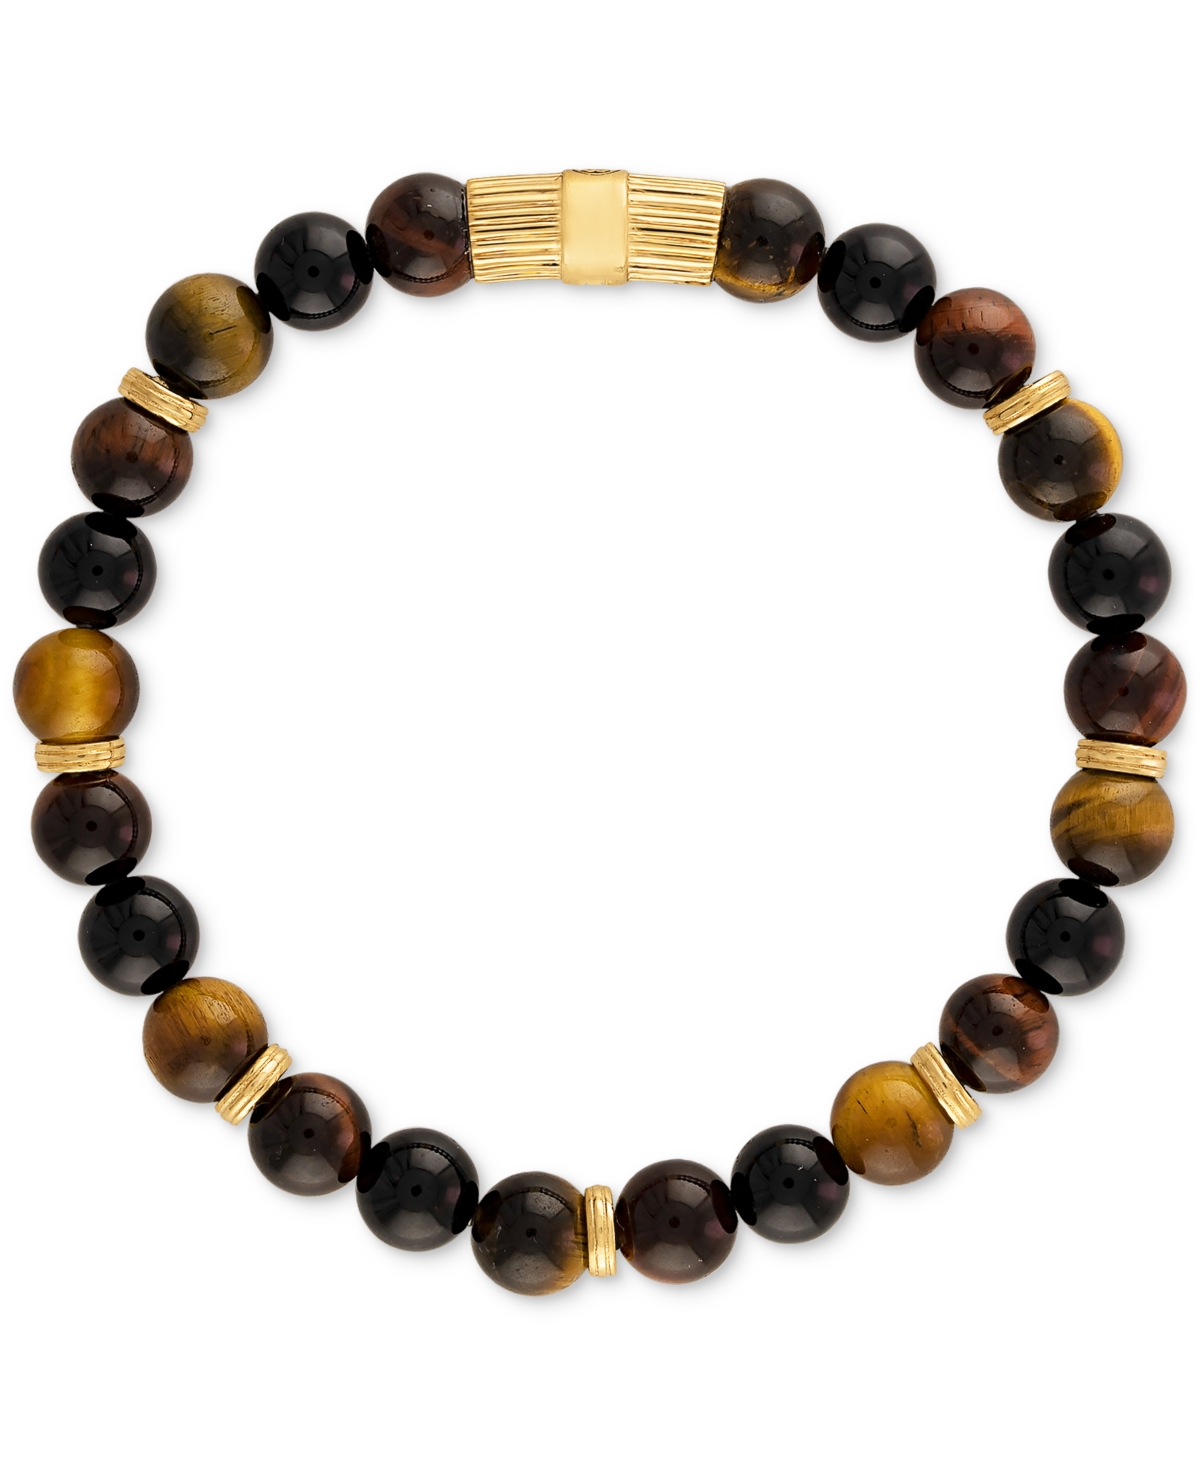 Multicolor Tiger Eye Beaded Stretch Bracelet in 14k Gold-Plated Sterling Silver (Also in Green Tiger Eye), Created for Macy's -